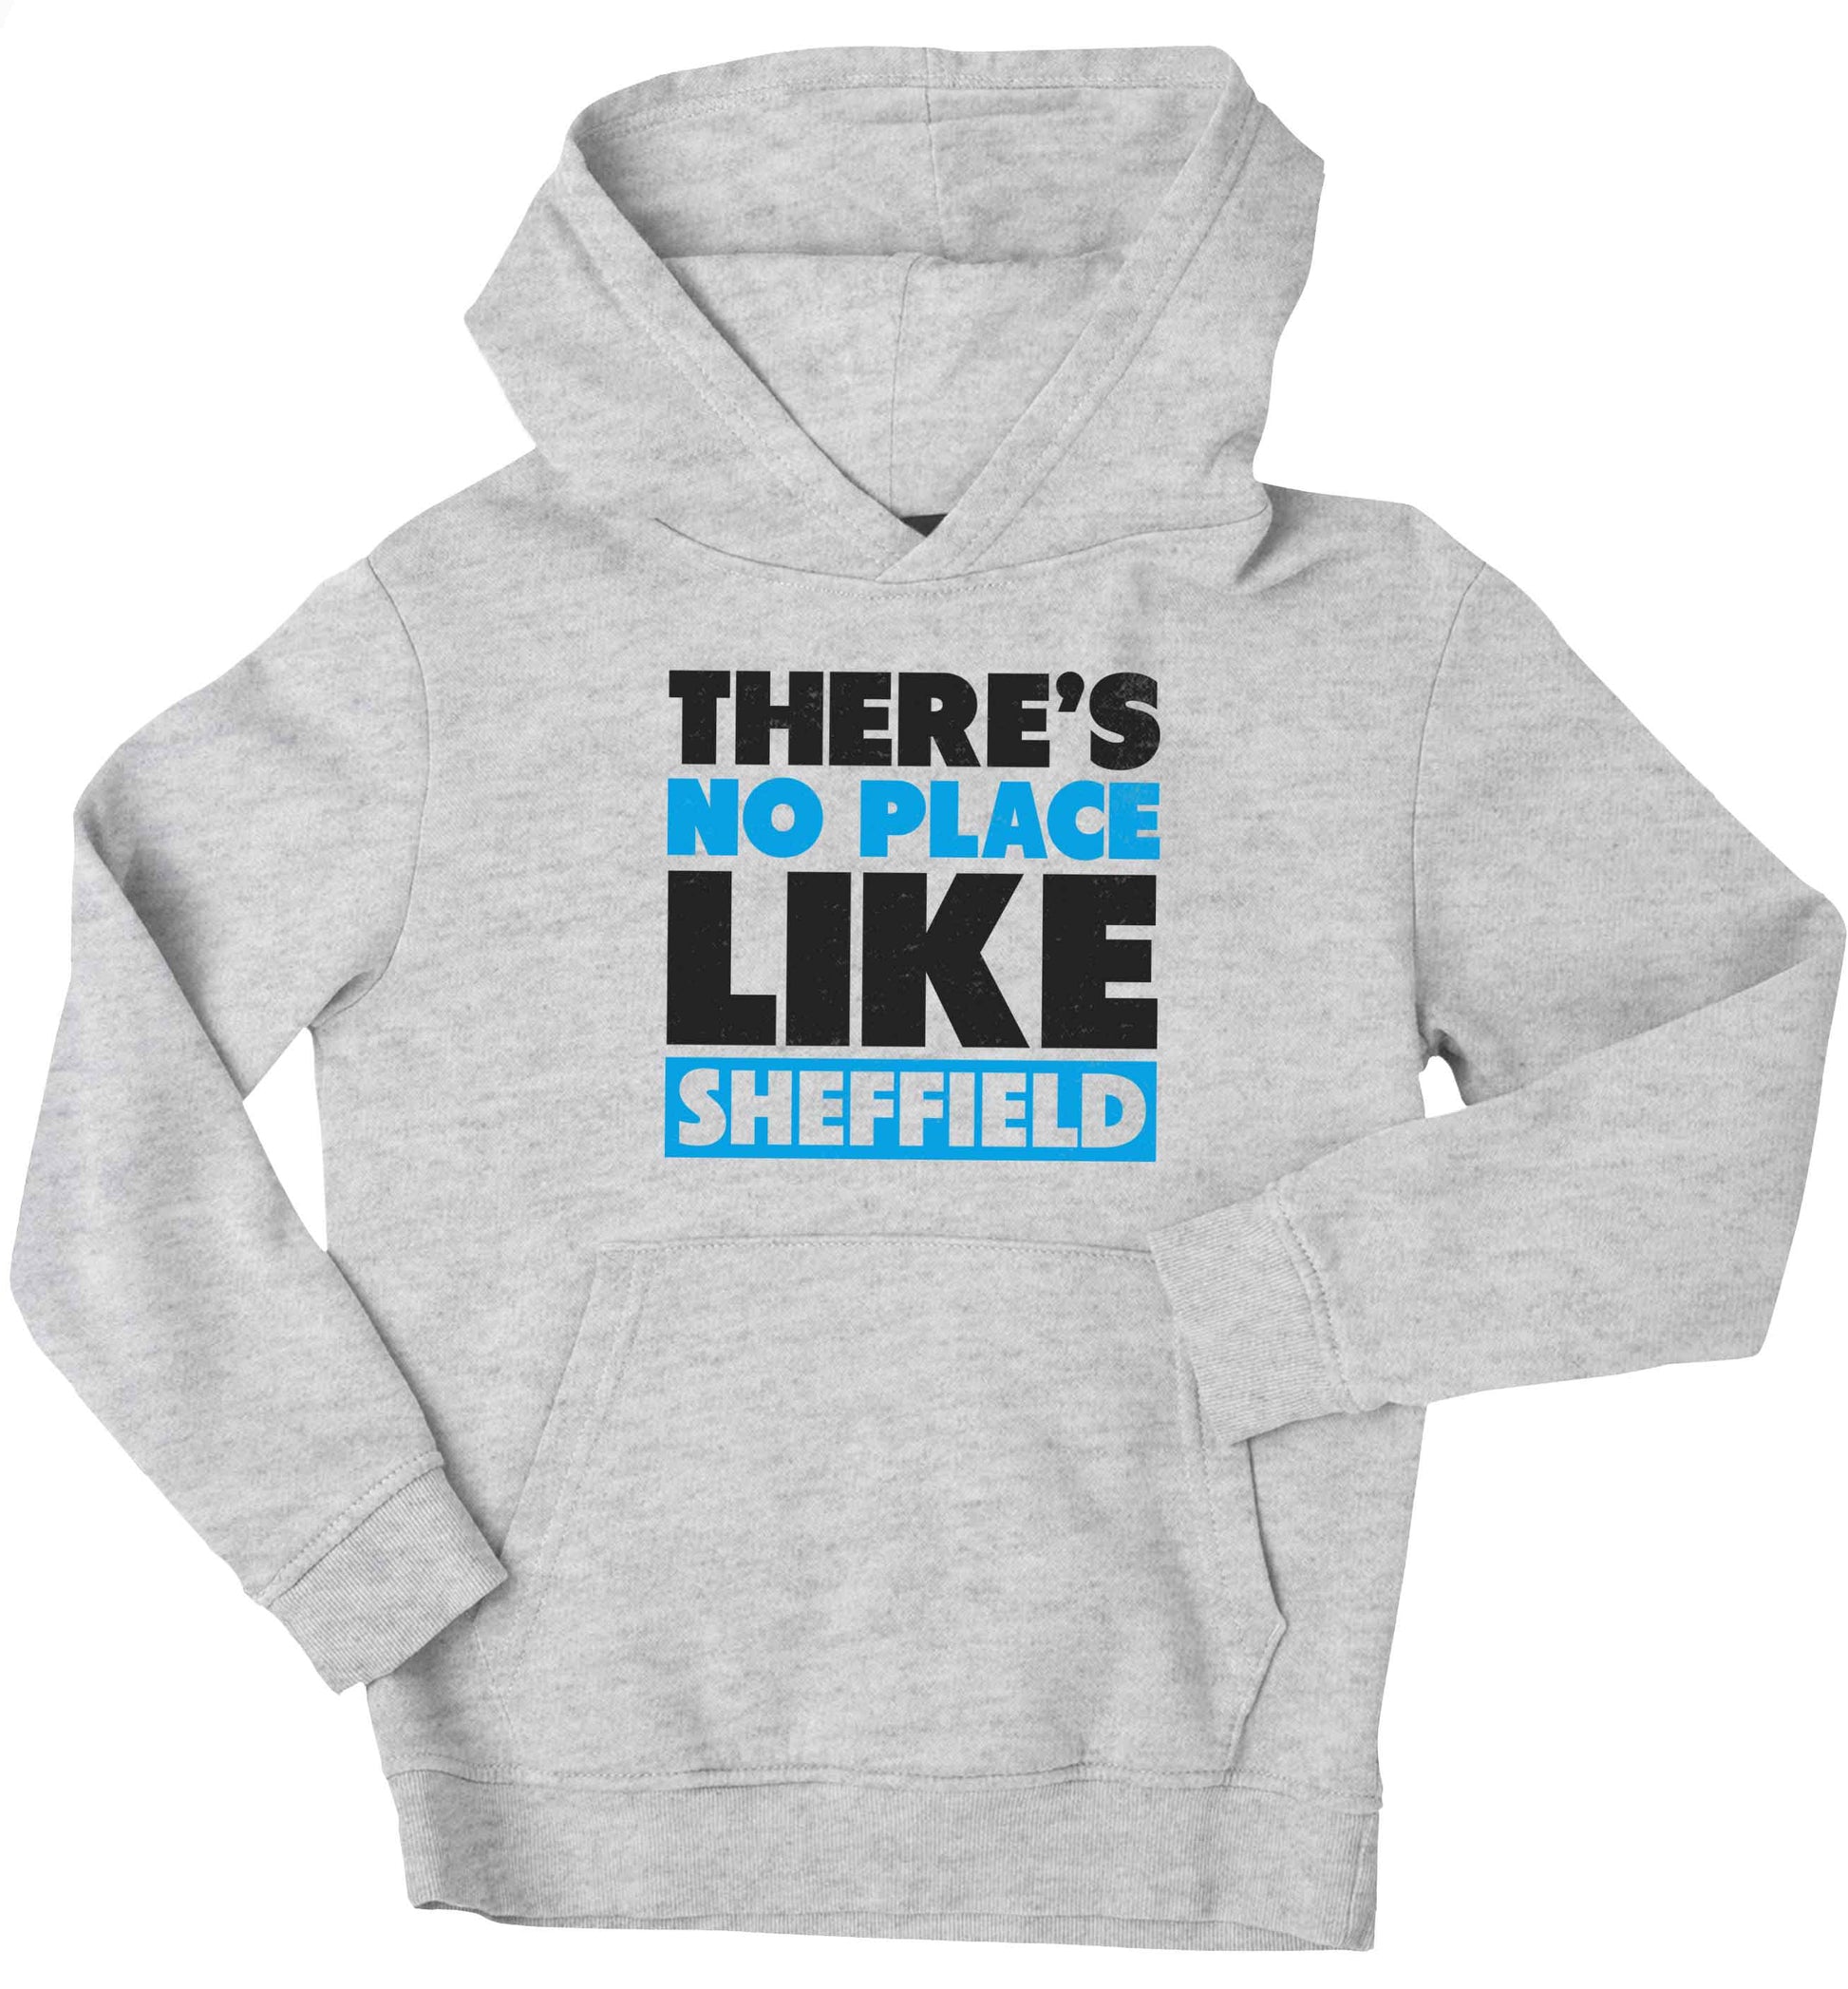 There's no place like Sheffield children's grey hoodie 12-13 Years